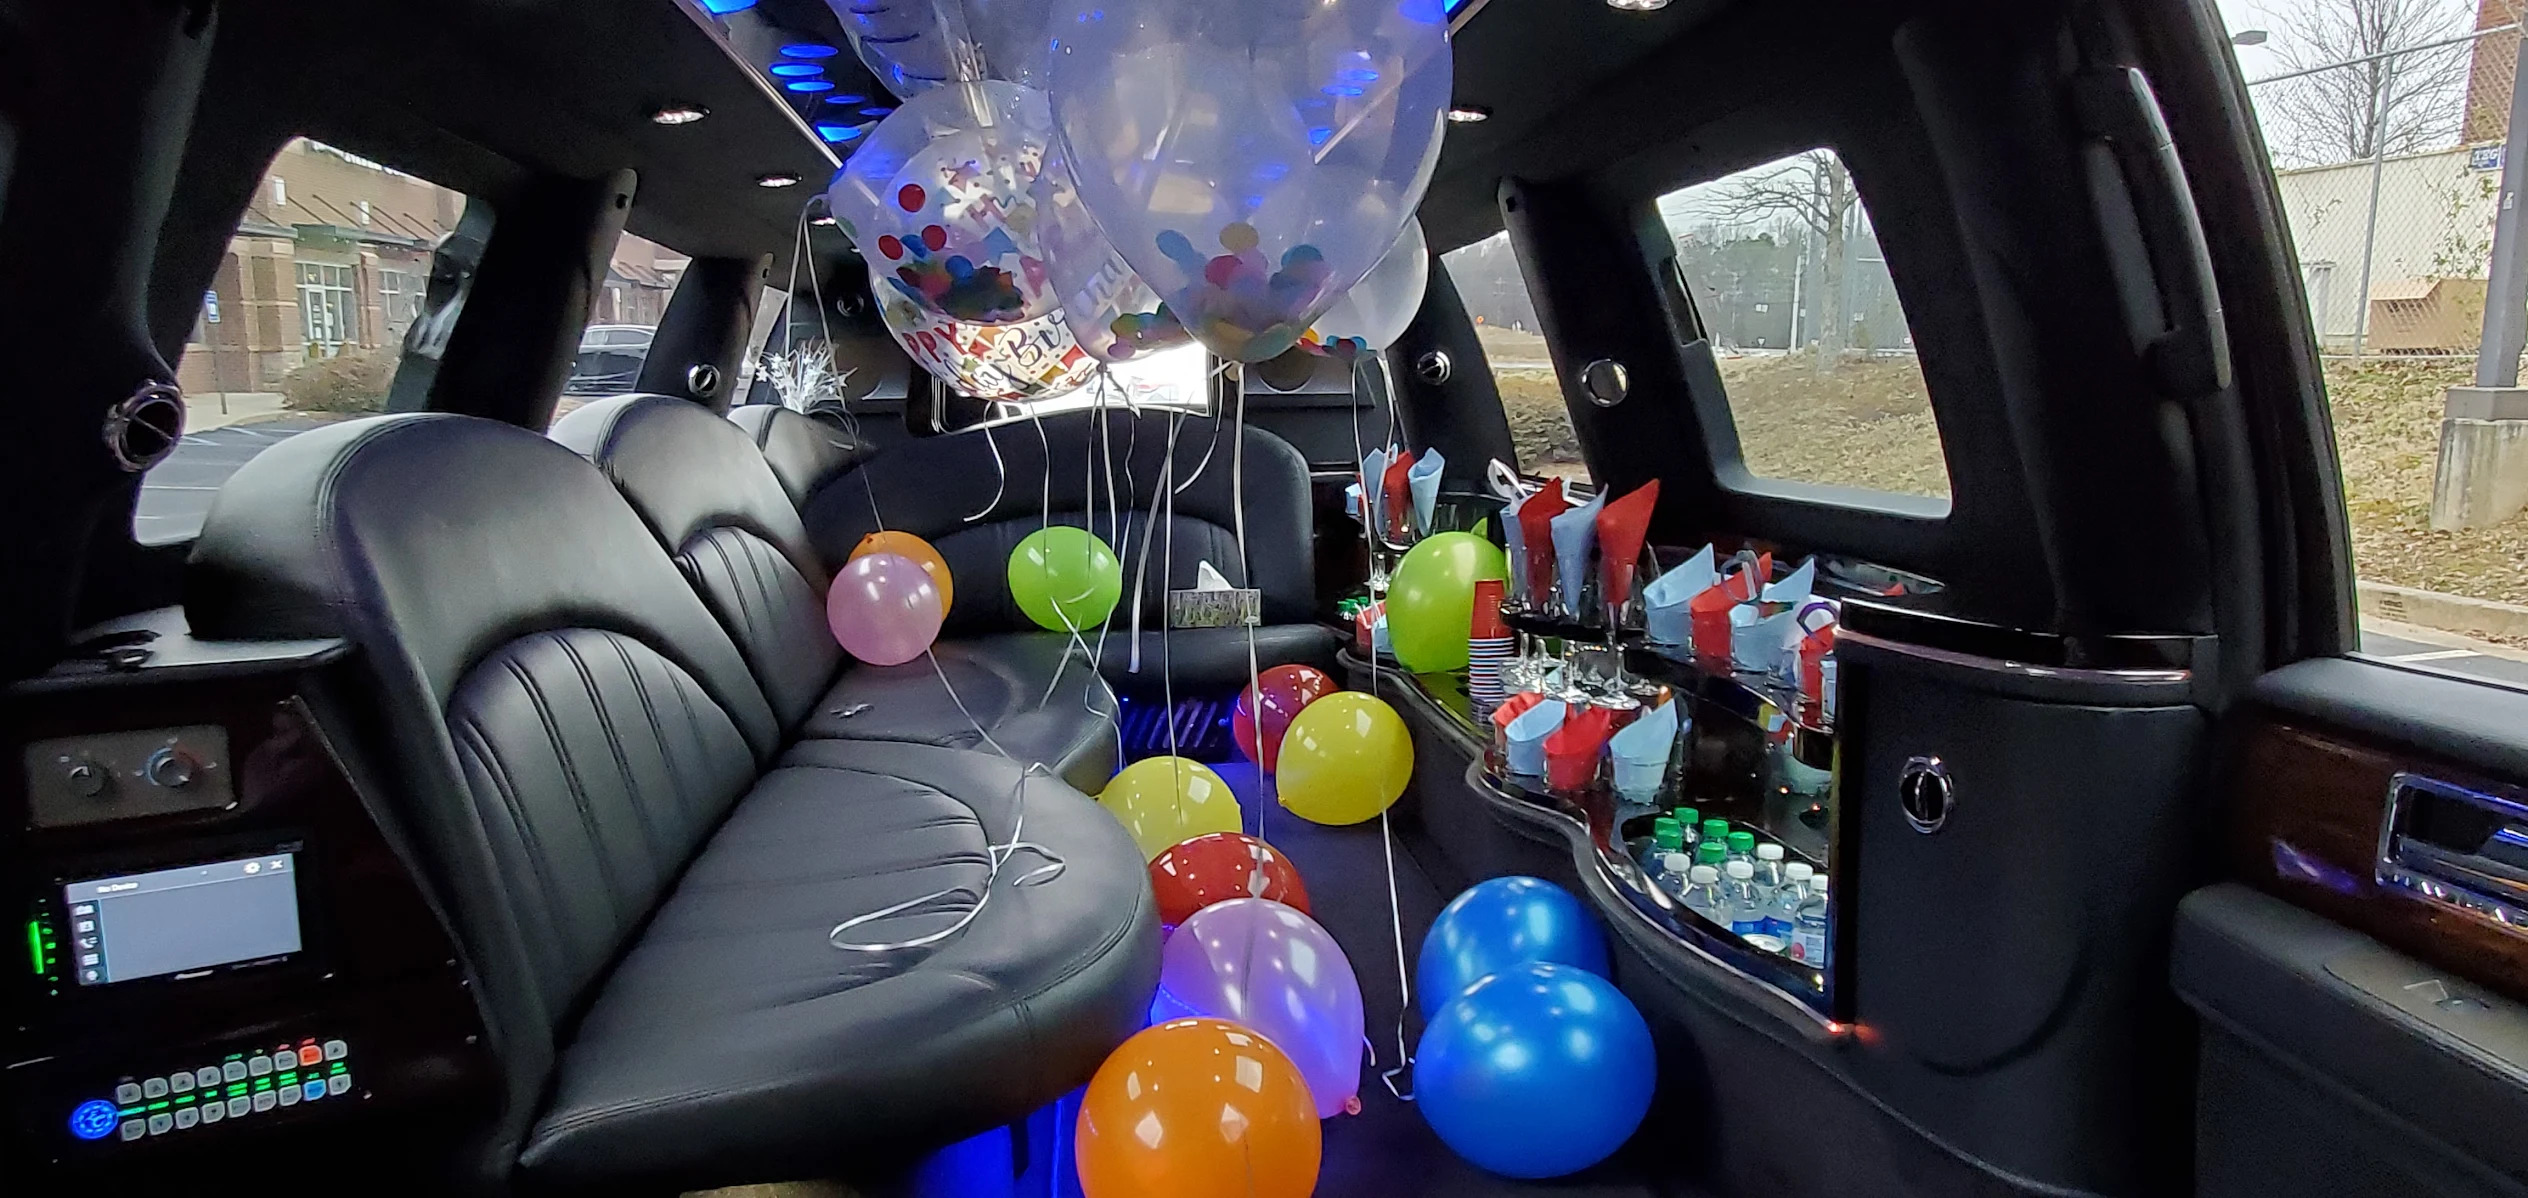 The Premium Birthday Party Limo Rental Services